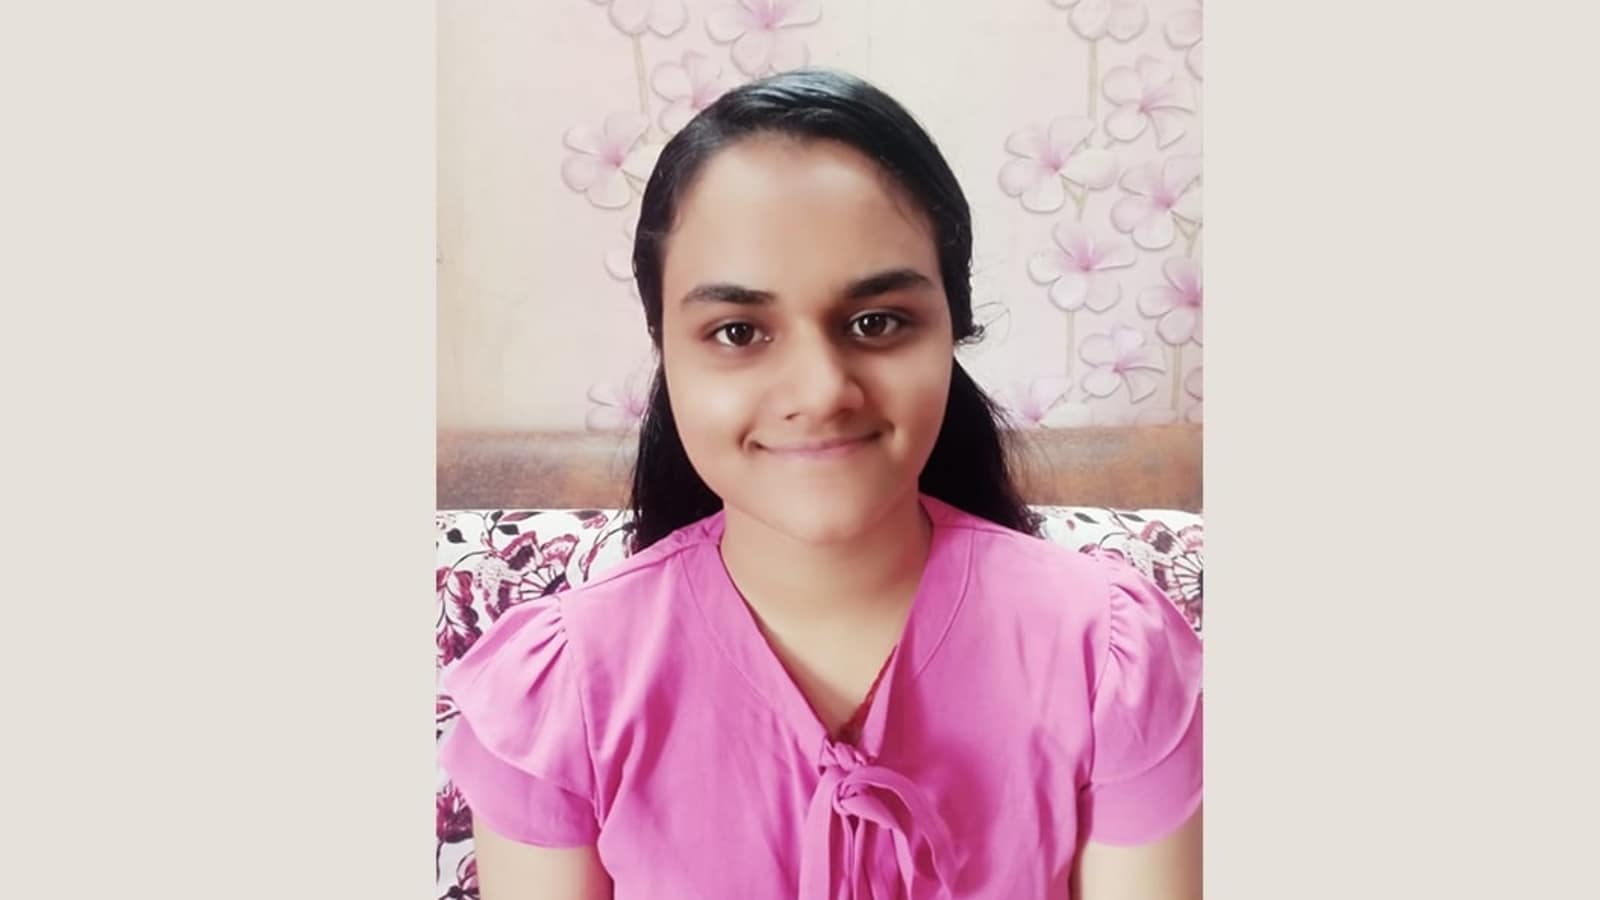 JEE main result 2021: Ghaziabad girl shares AIR 1 with 17 others